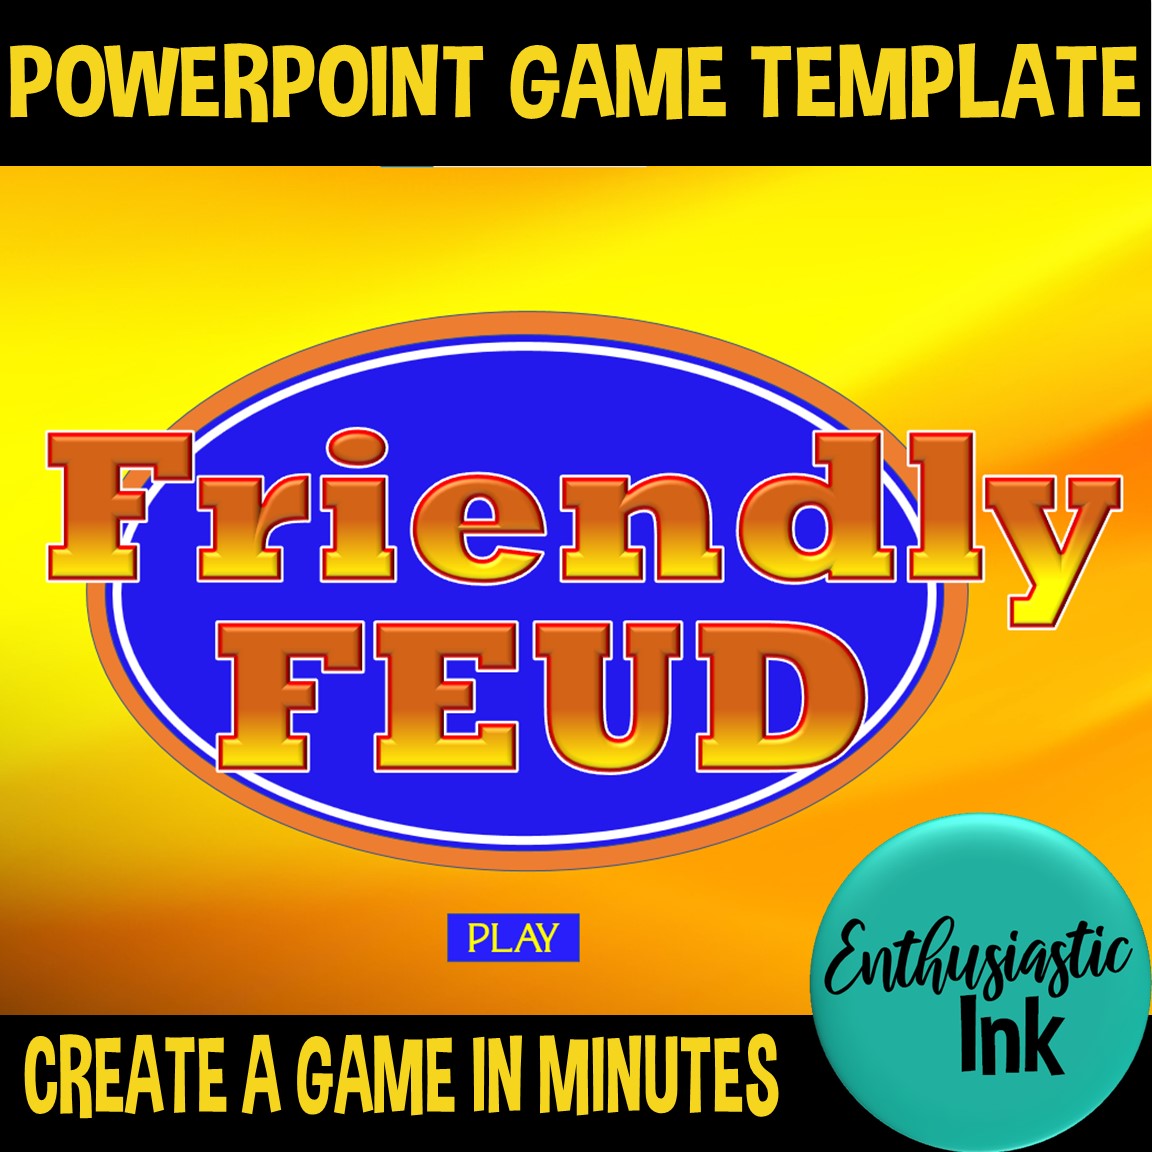 Create Your Own End of the Year Game Template Friendly Feud Template